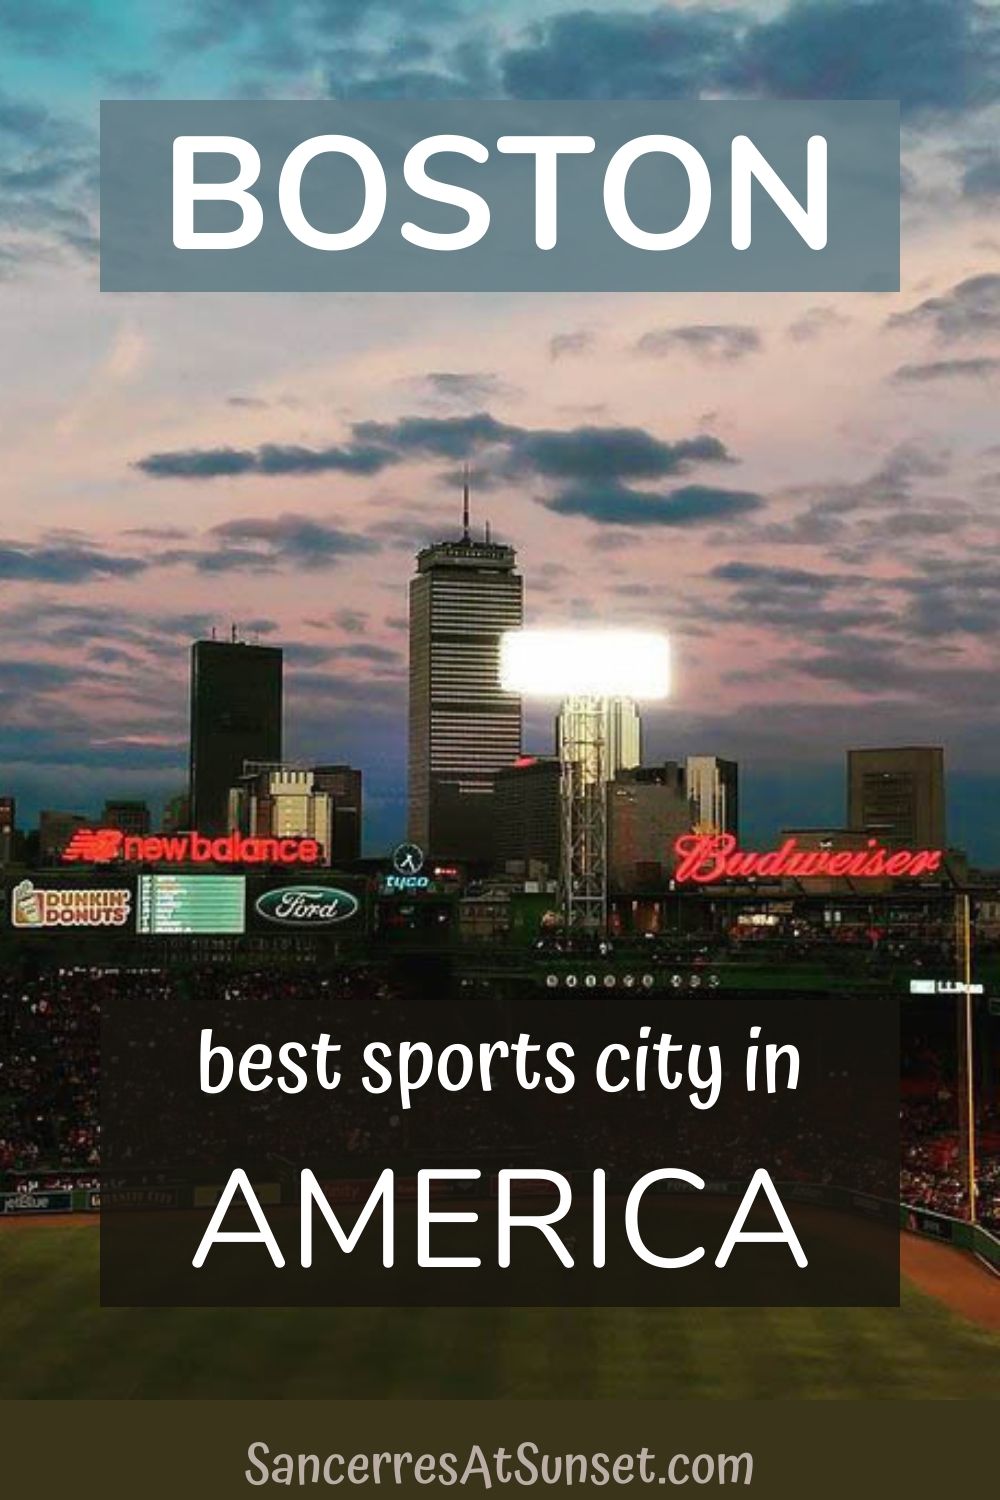 Boston Ranked No. 1 City for Sports in America